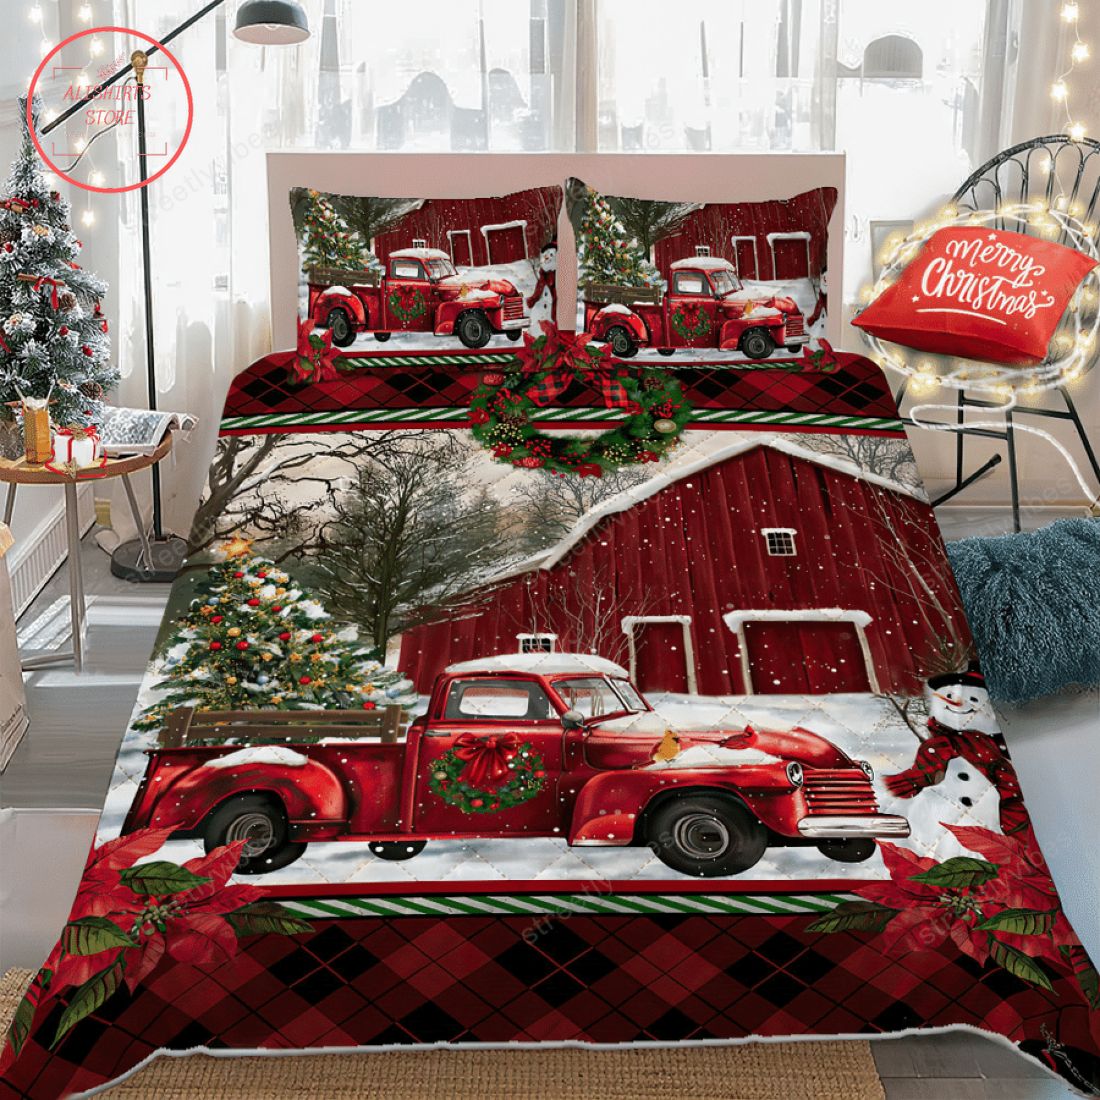 Red Truck Christmas Quilt Bed Set